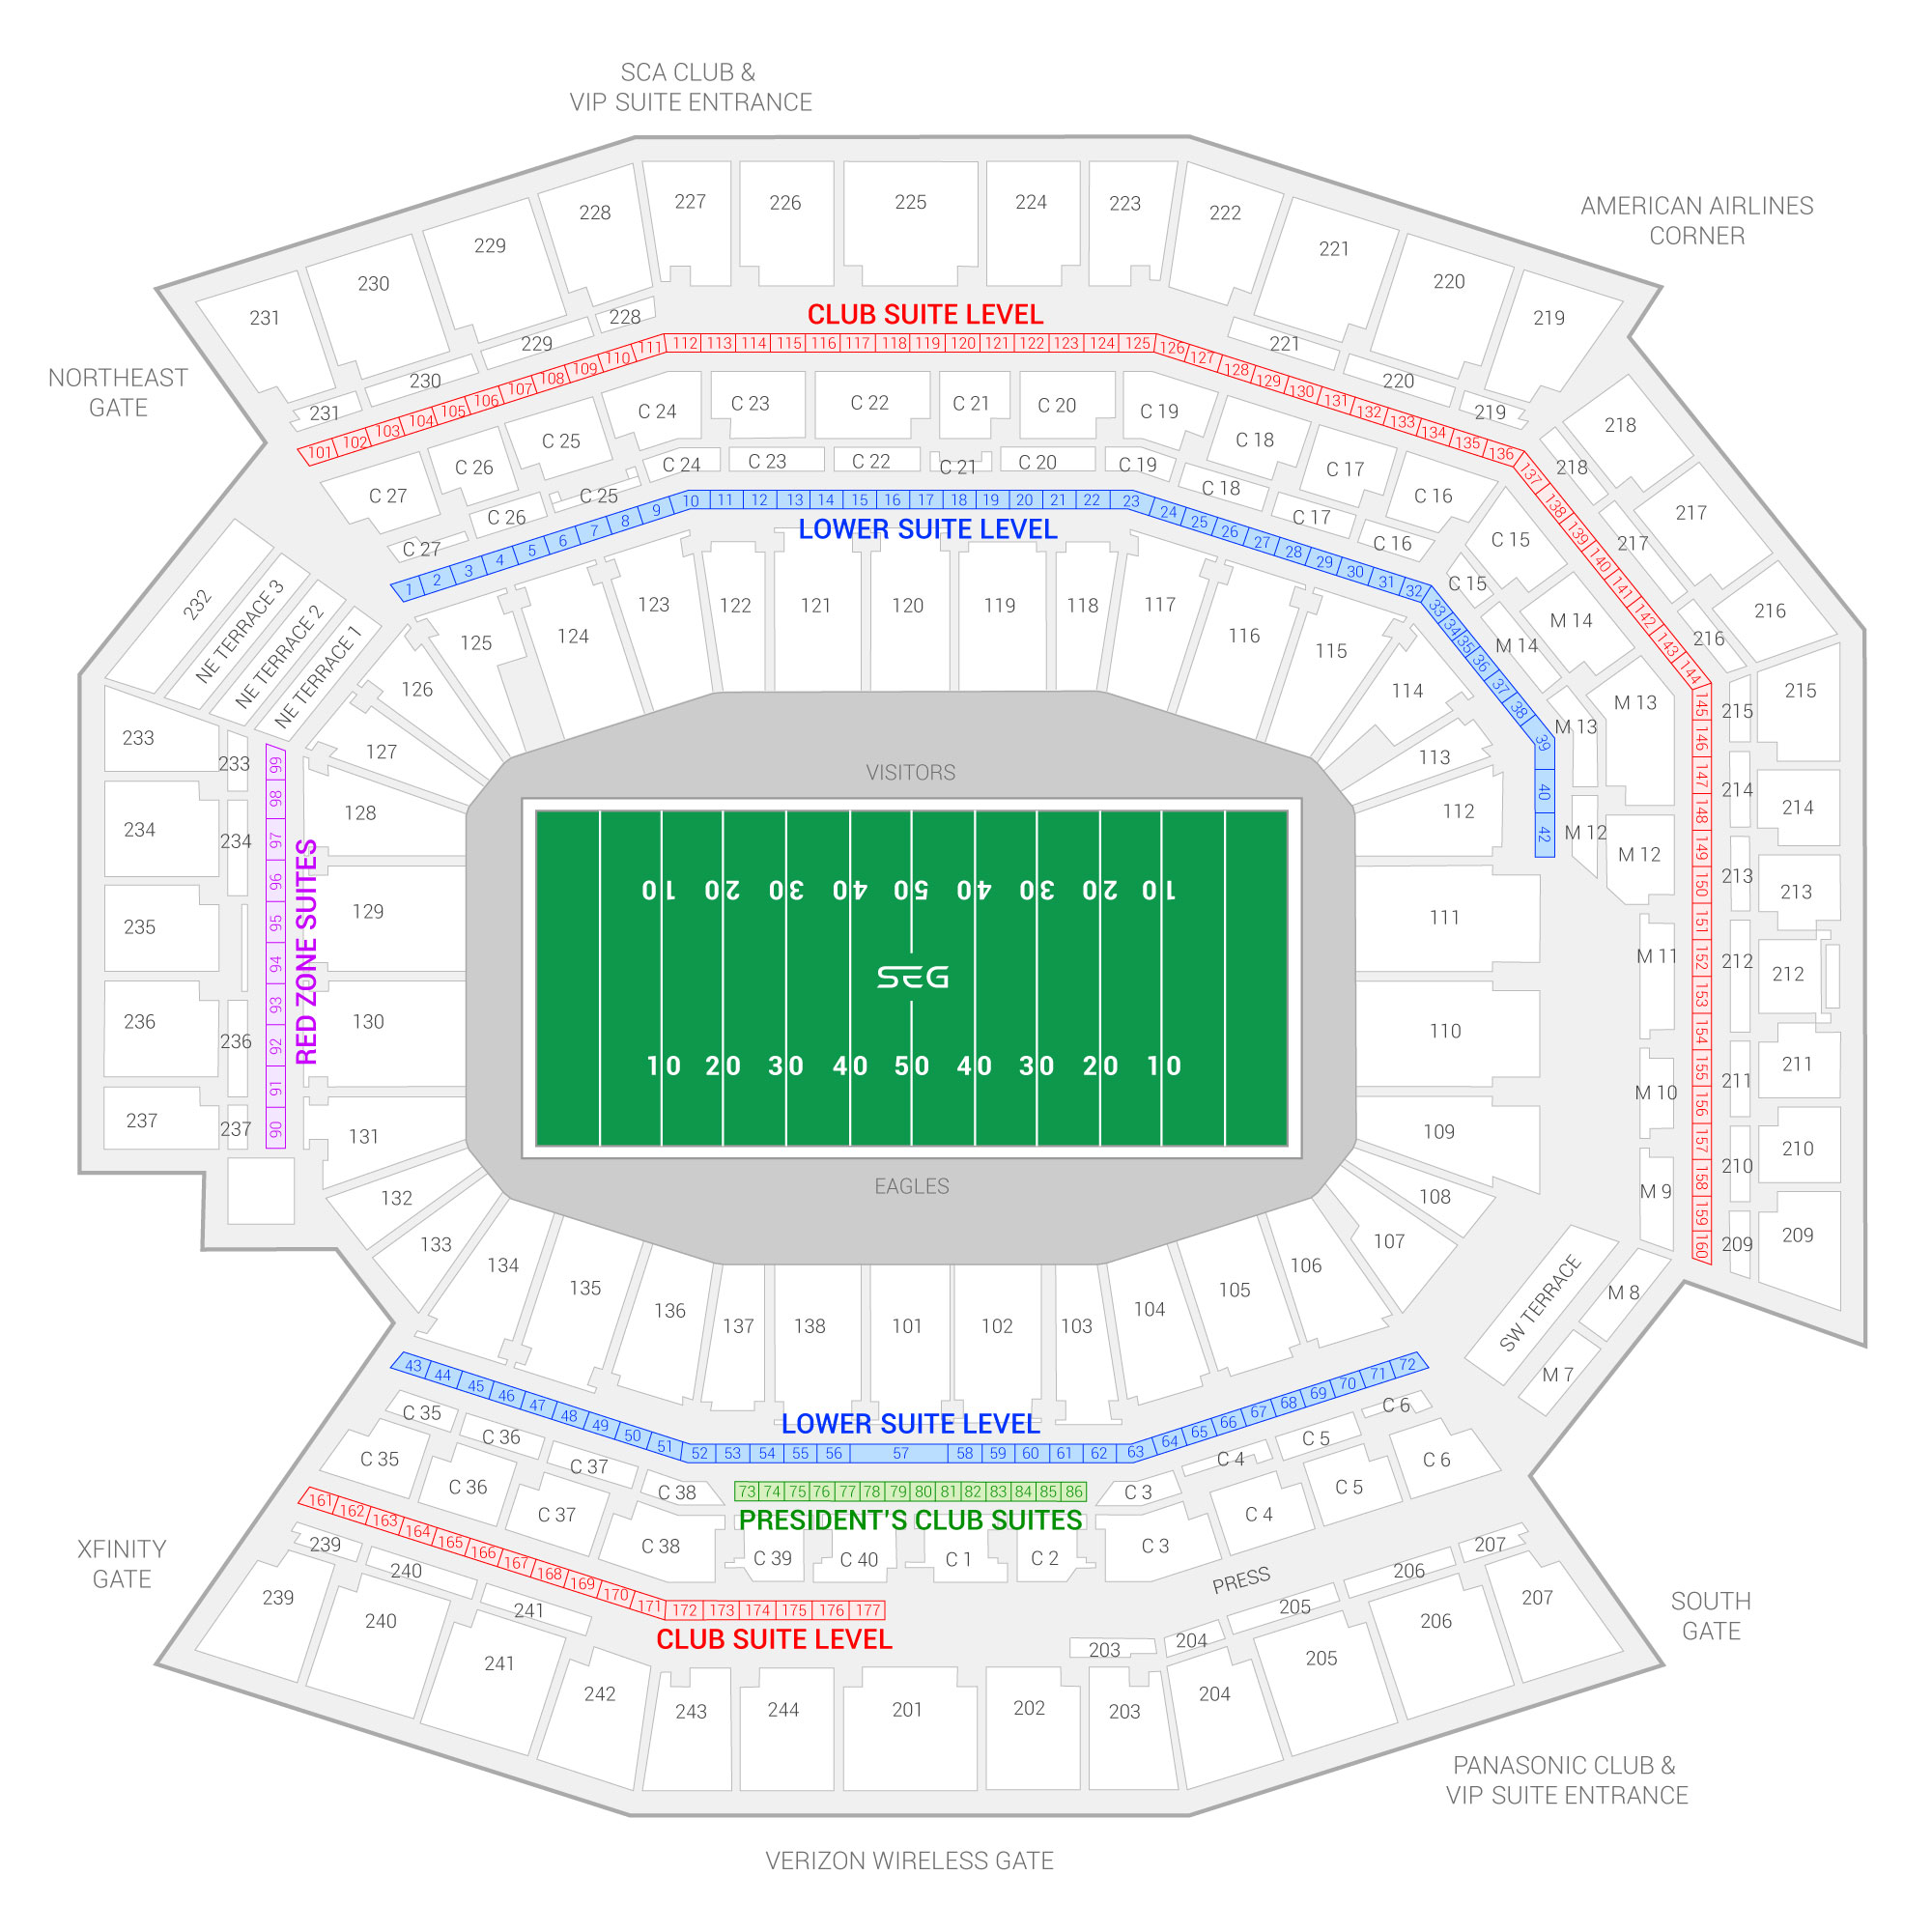 WrestleMania 40 tickets AVAILABLE NOW